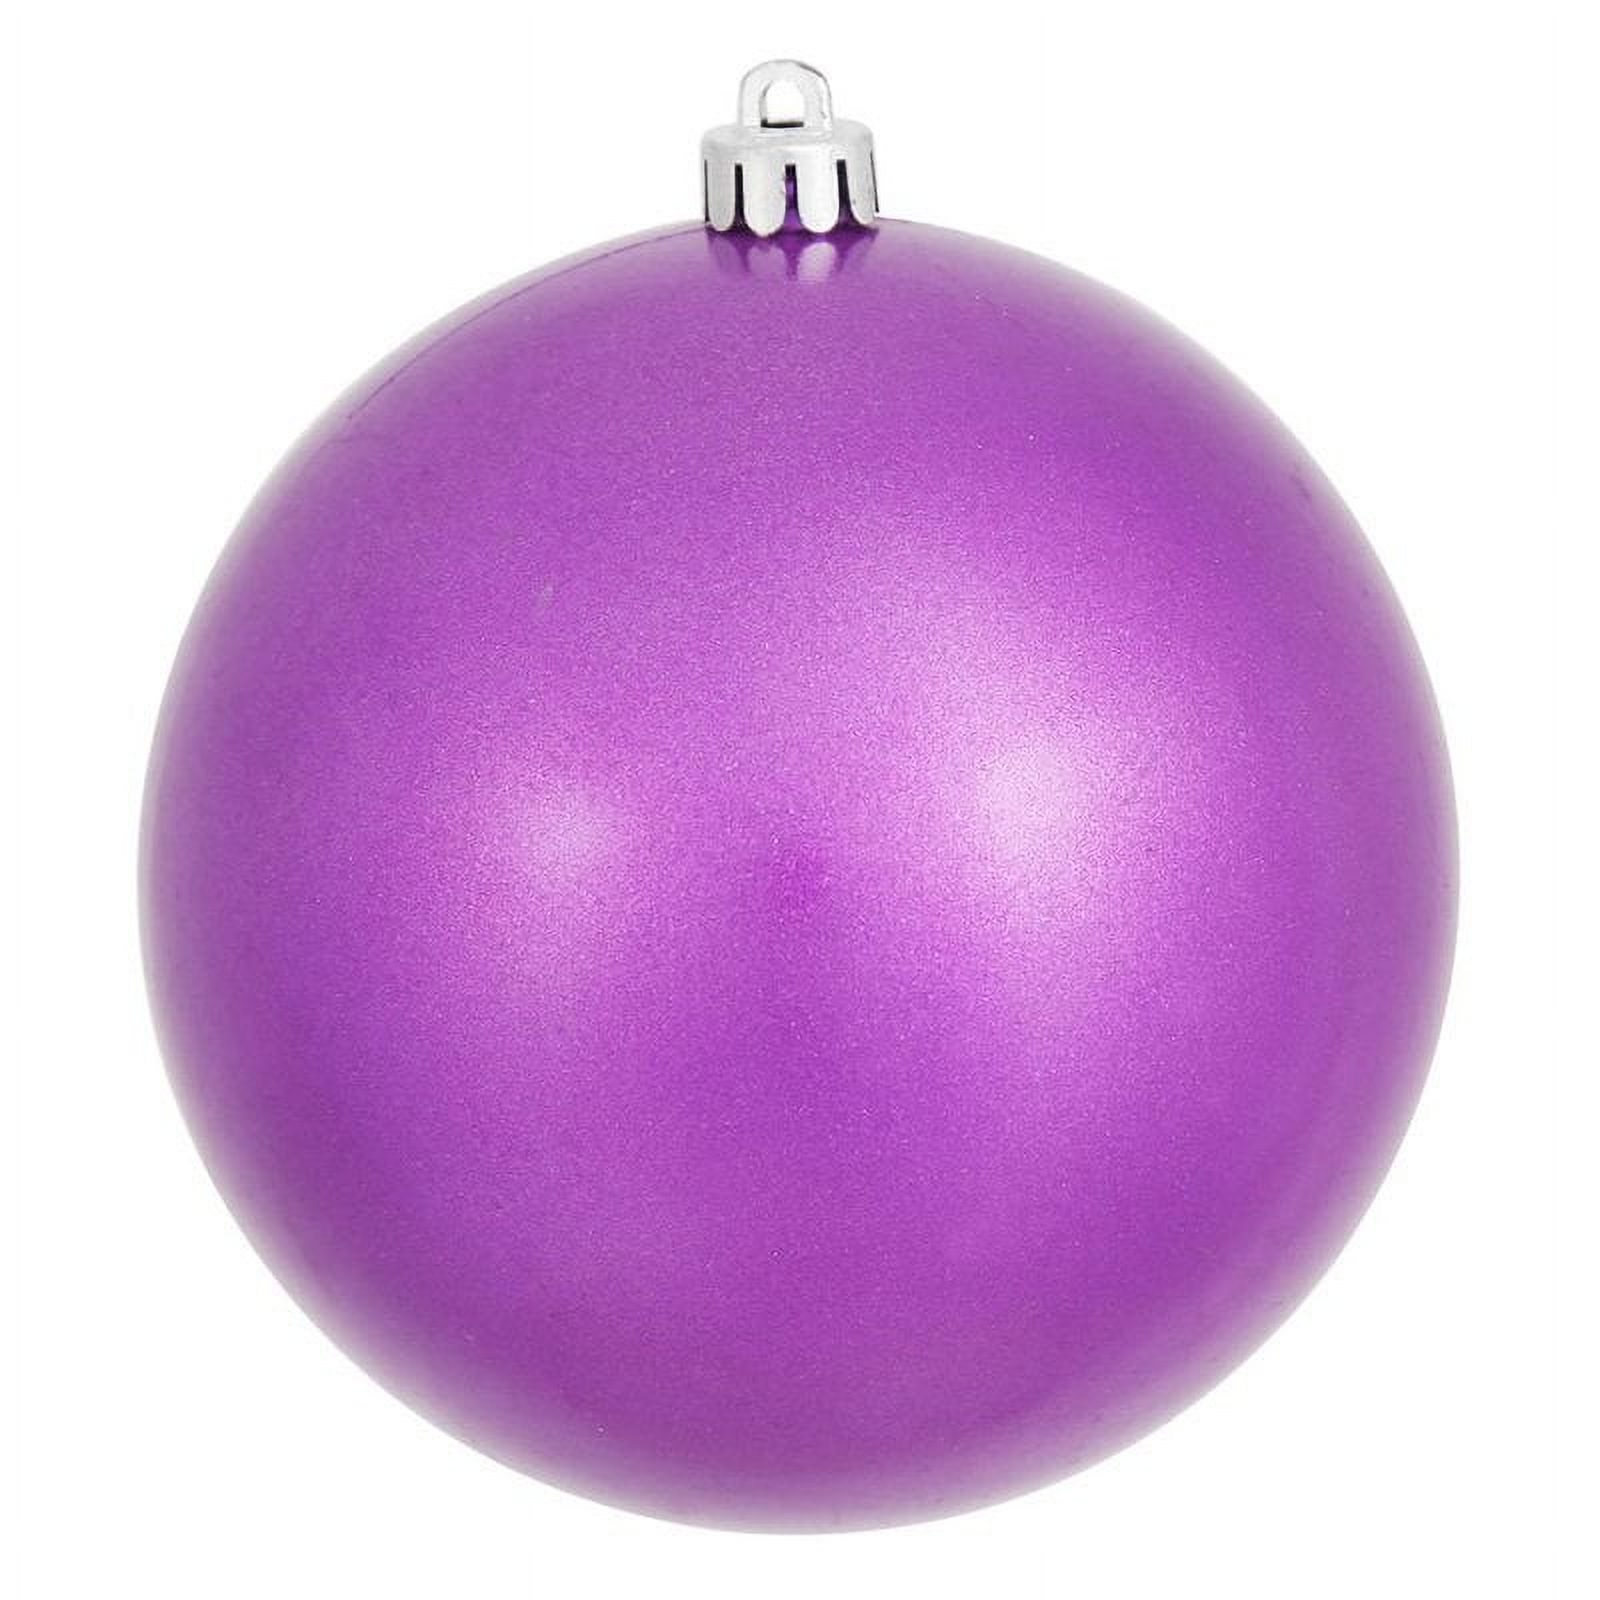 Vickerman 4.75 in. Candy Ball Ornament - Set of 4 - image 1 of 7